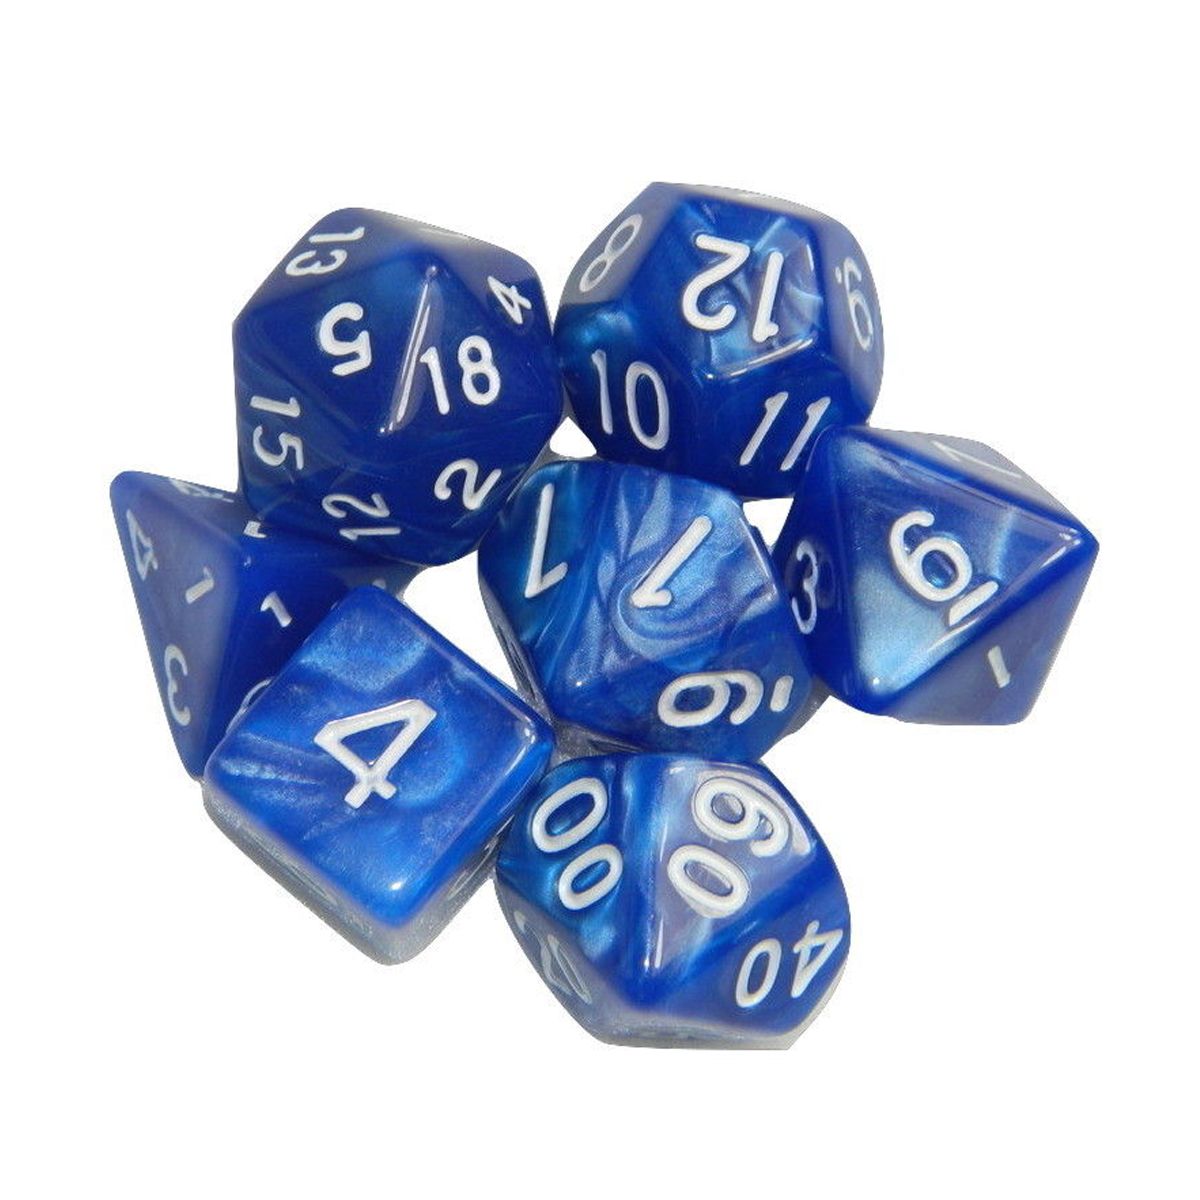 21-Pcs-3-Colrs-Polyhedral-Dice-Sets-Multisided-Dice-Role-Playing-Game-Dice-Gadget-1254658